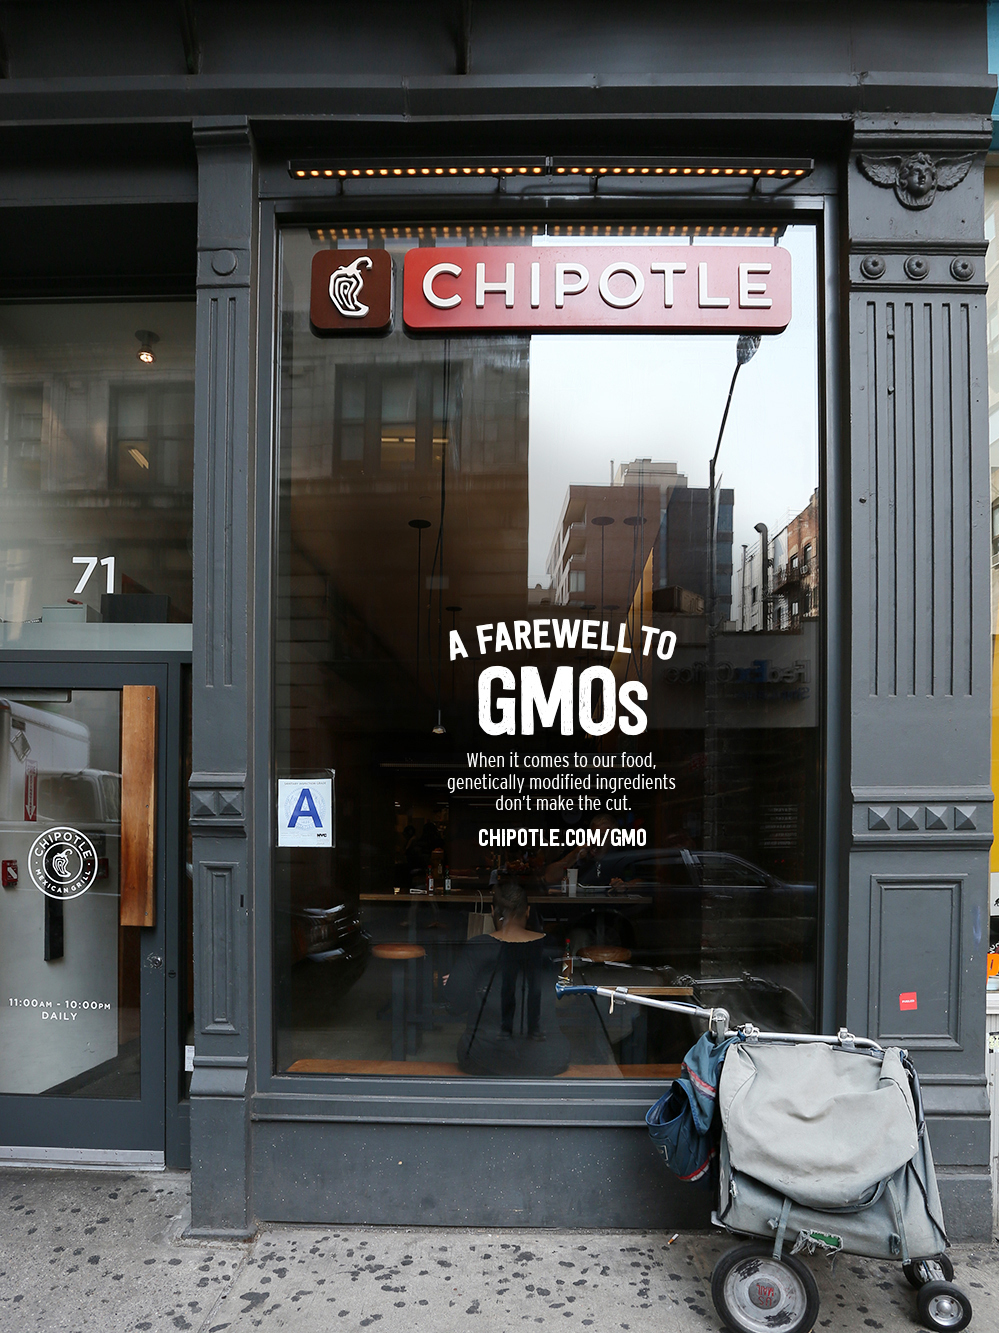 Fast-casual food chain Chipotle Mexican Grill pledged to remove all ingredients made with genetically modified organisms from its menu two years ago. It's now fulfilled that promise, although Chipotle still uses meat from animals that may feed on GMO corn or soybeans.